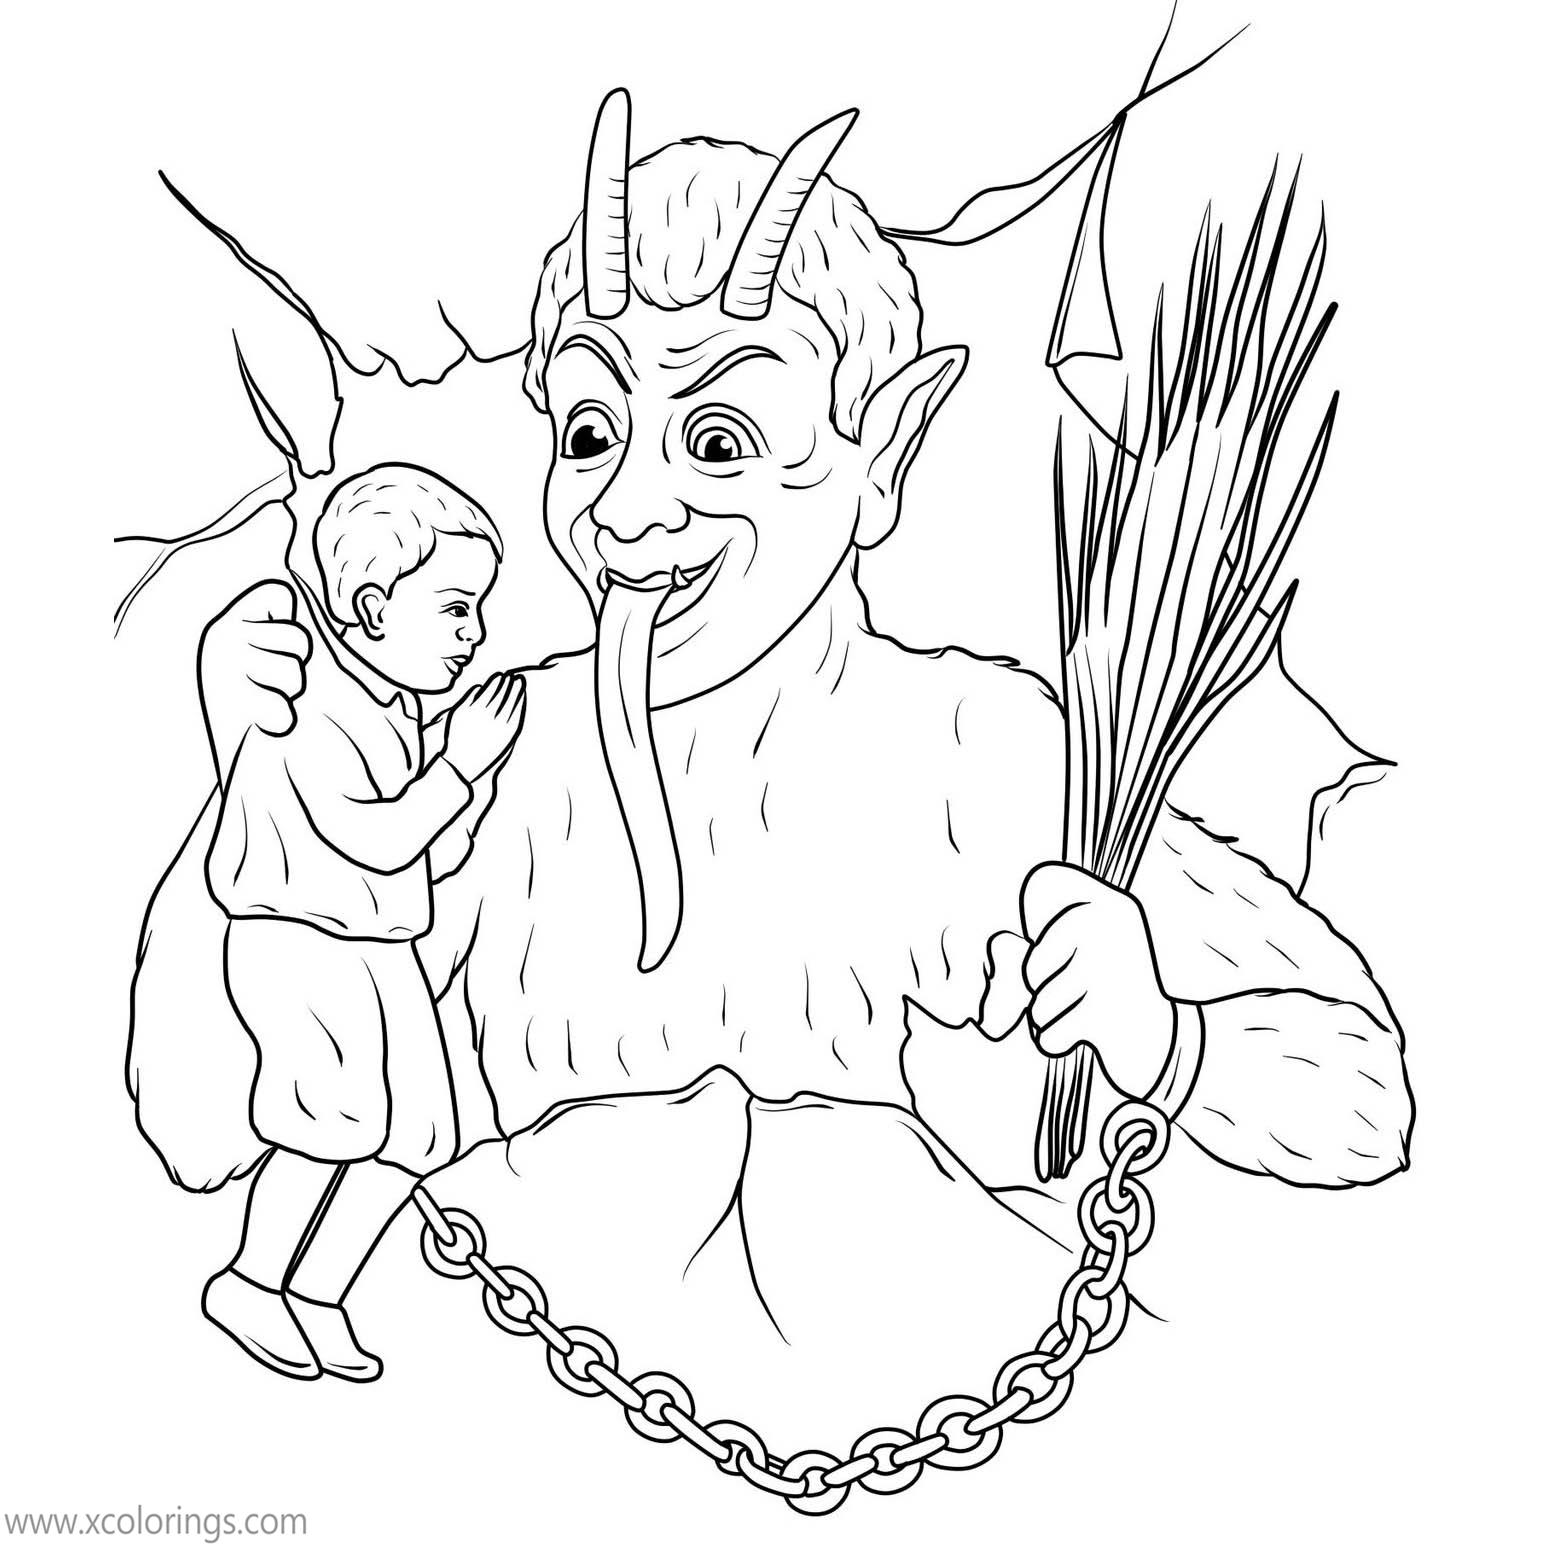 Free Krampus Coloring Pages Catching A Boy printable